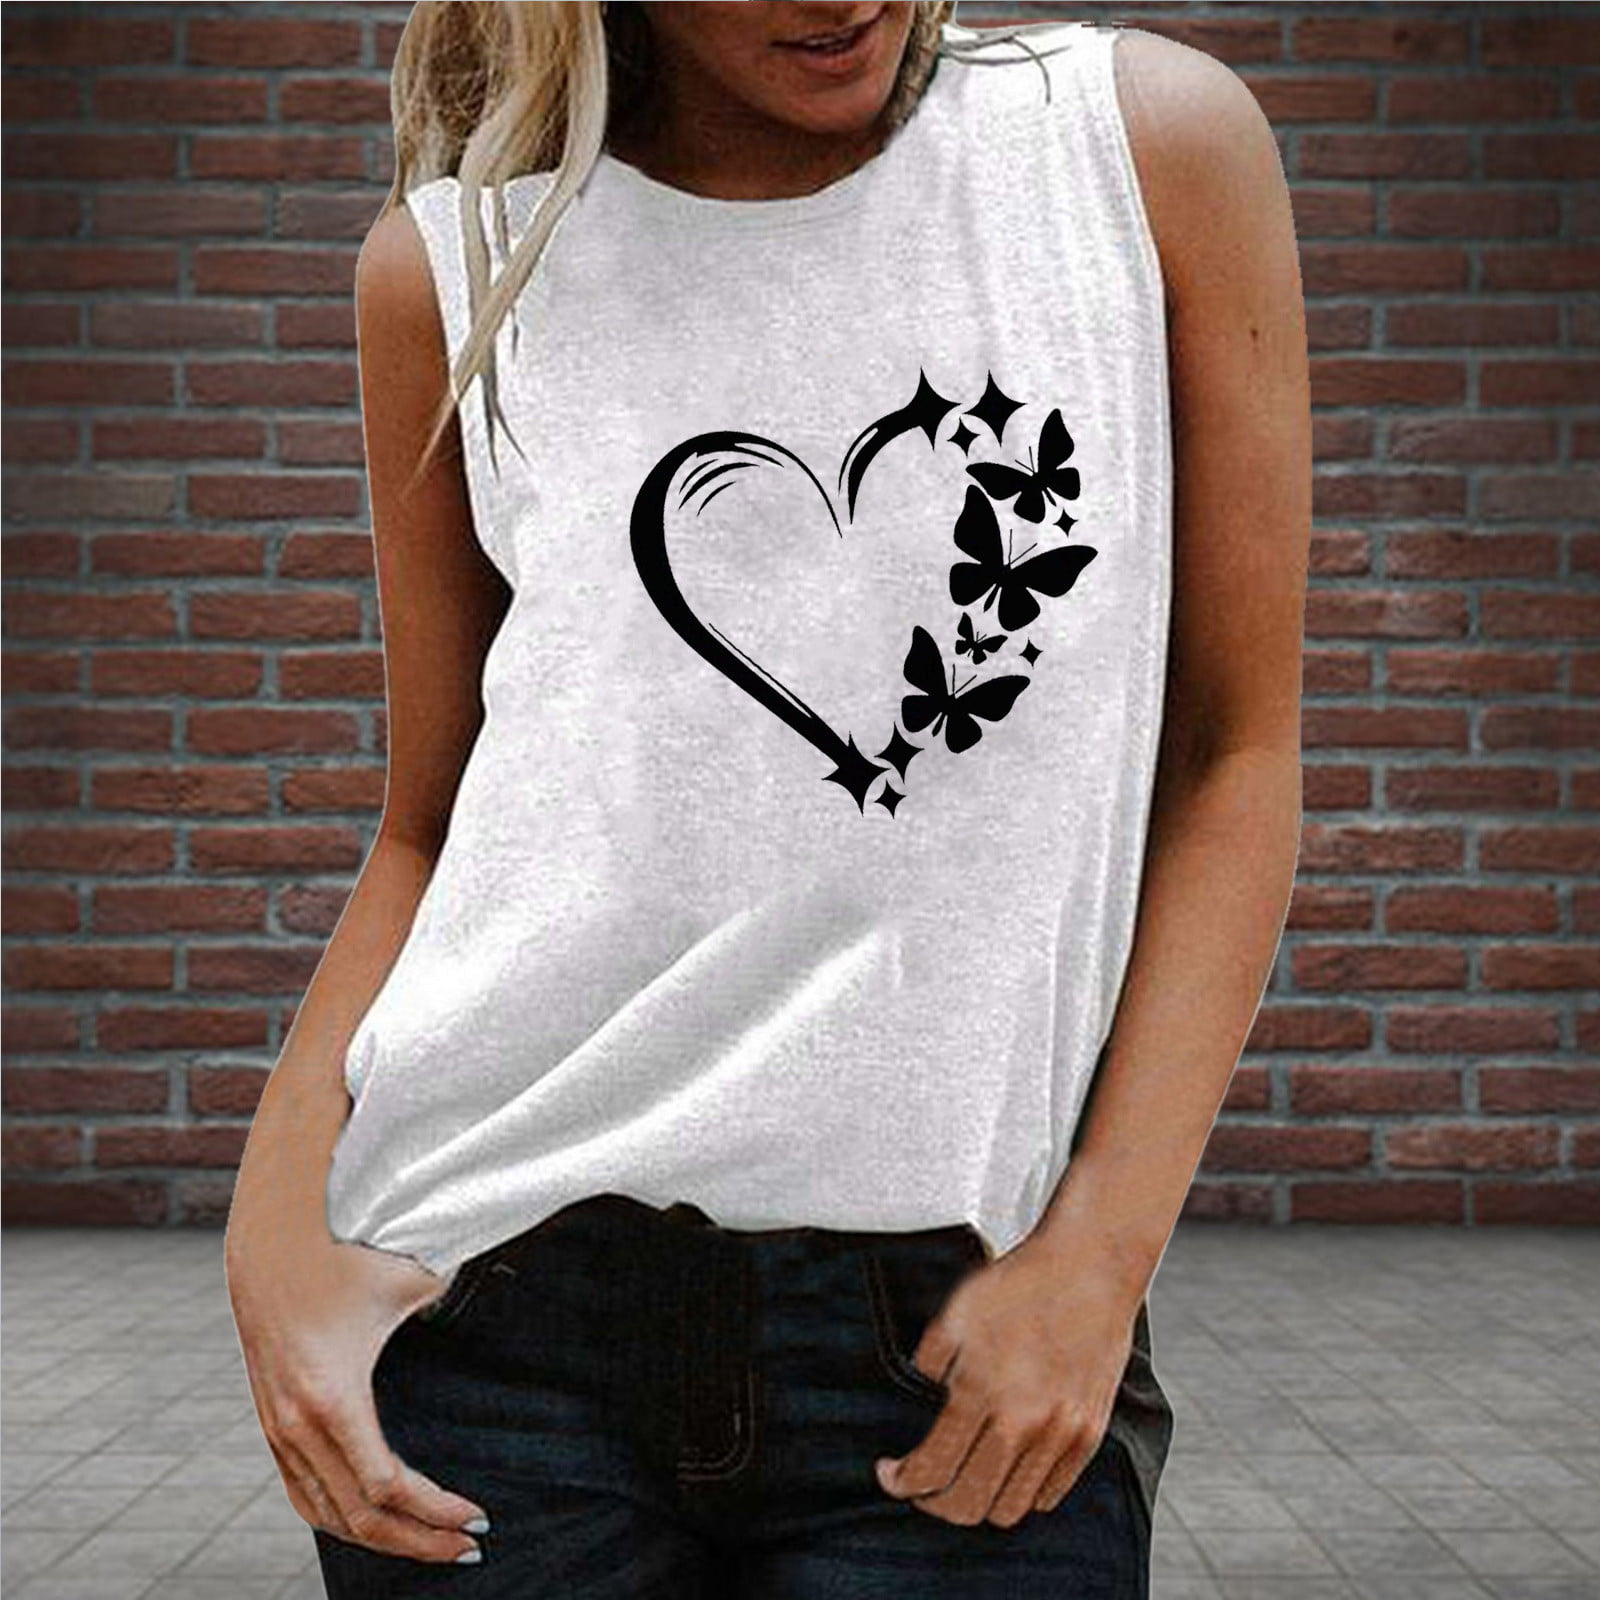 Yilirongyumm〗 White M Tank Top For Women Vest Top Funny-Printed Round Neck Top T-Shirt Vest Tee Shirt Blouse Casual Tops - Walmart.com